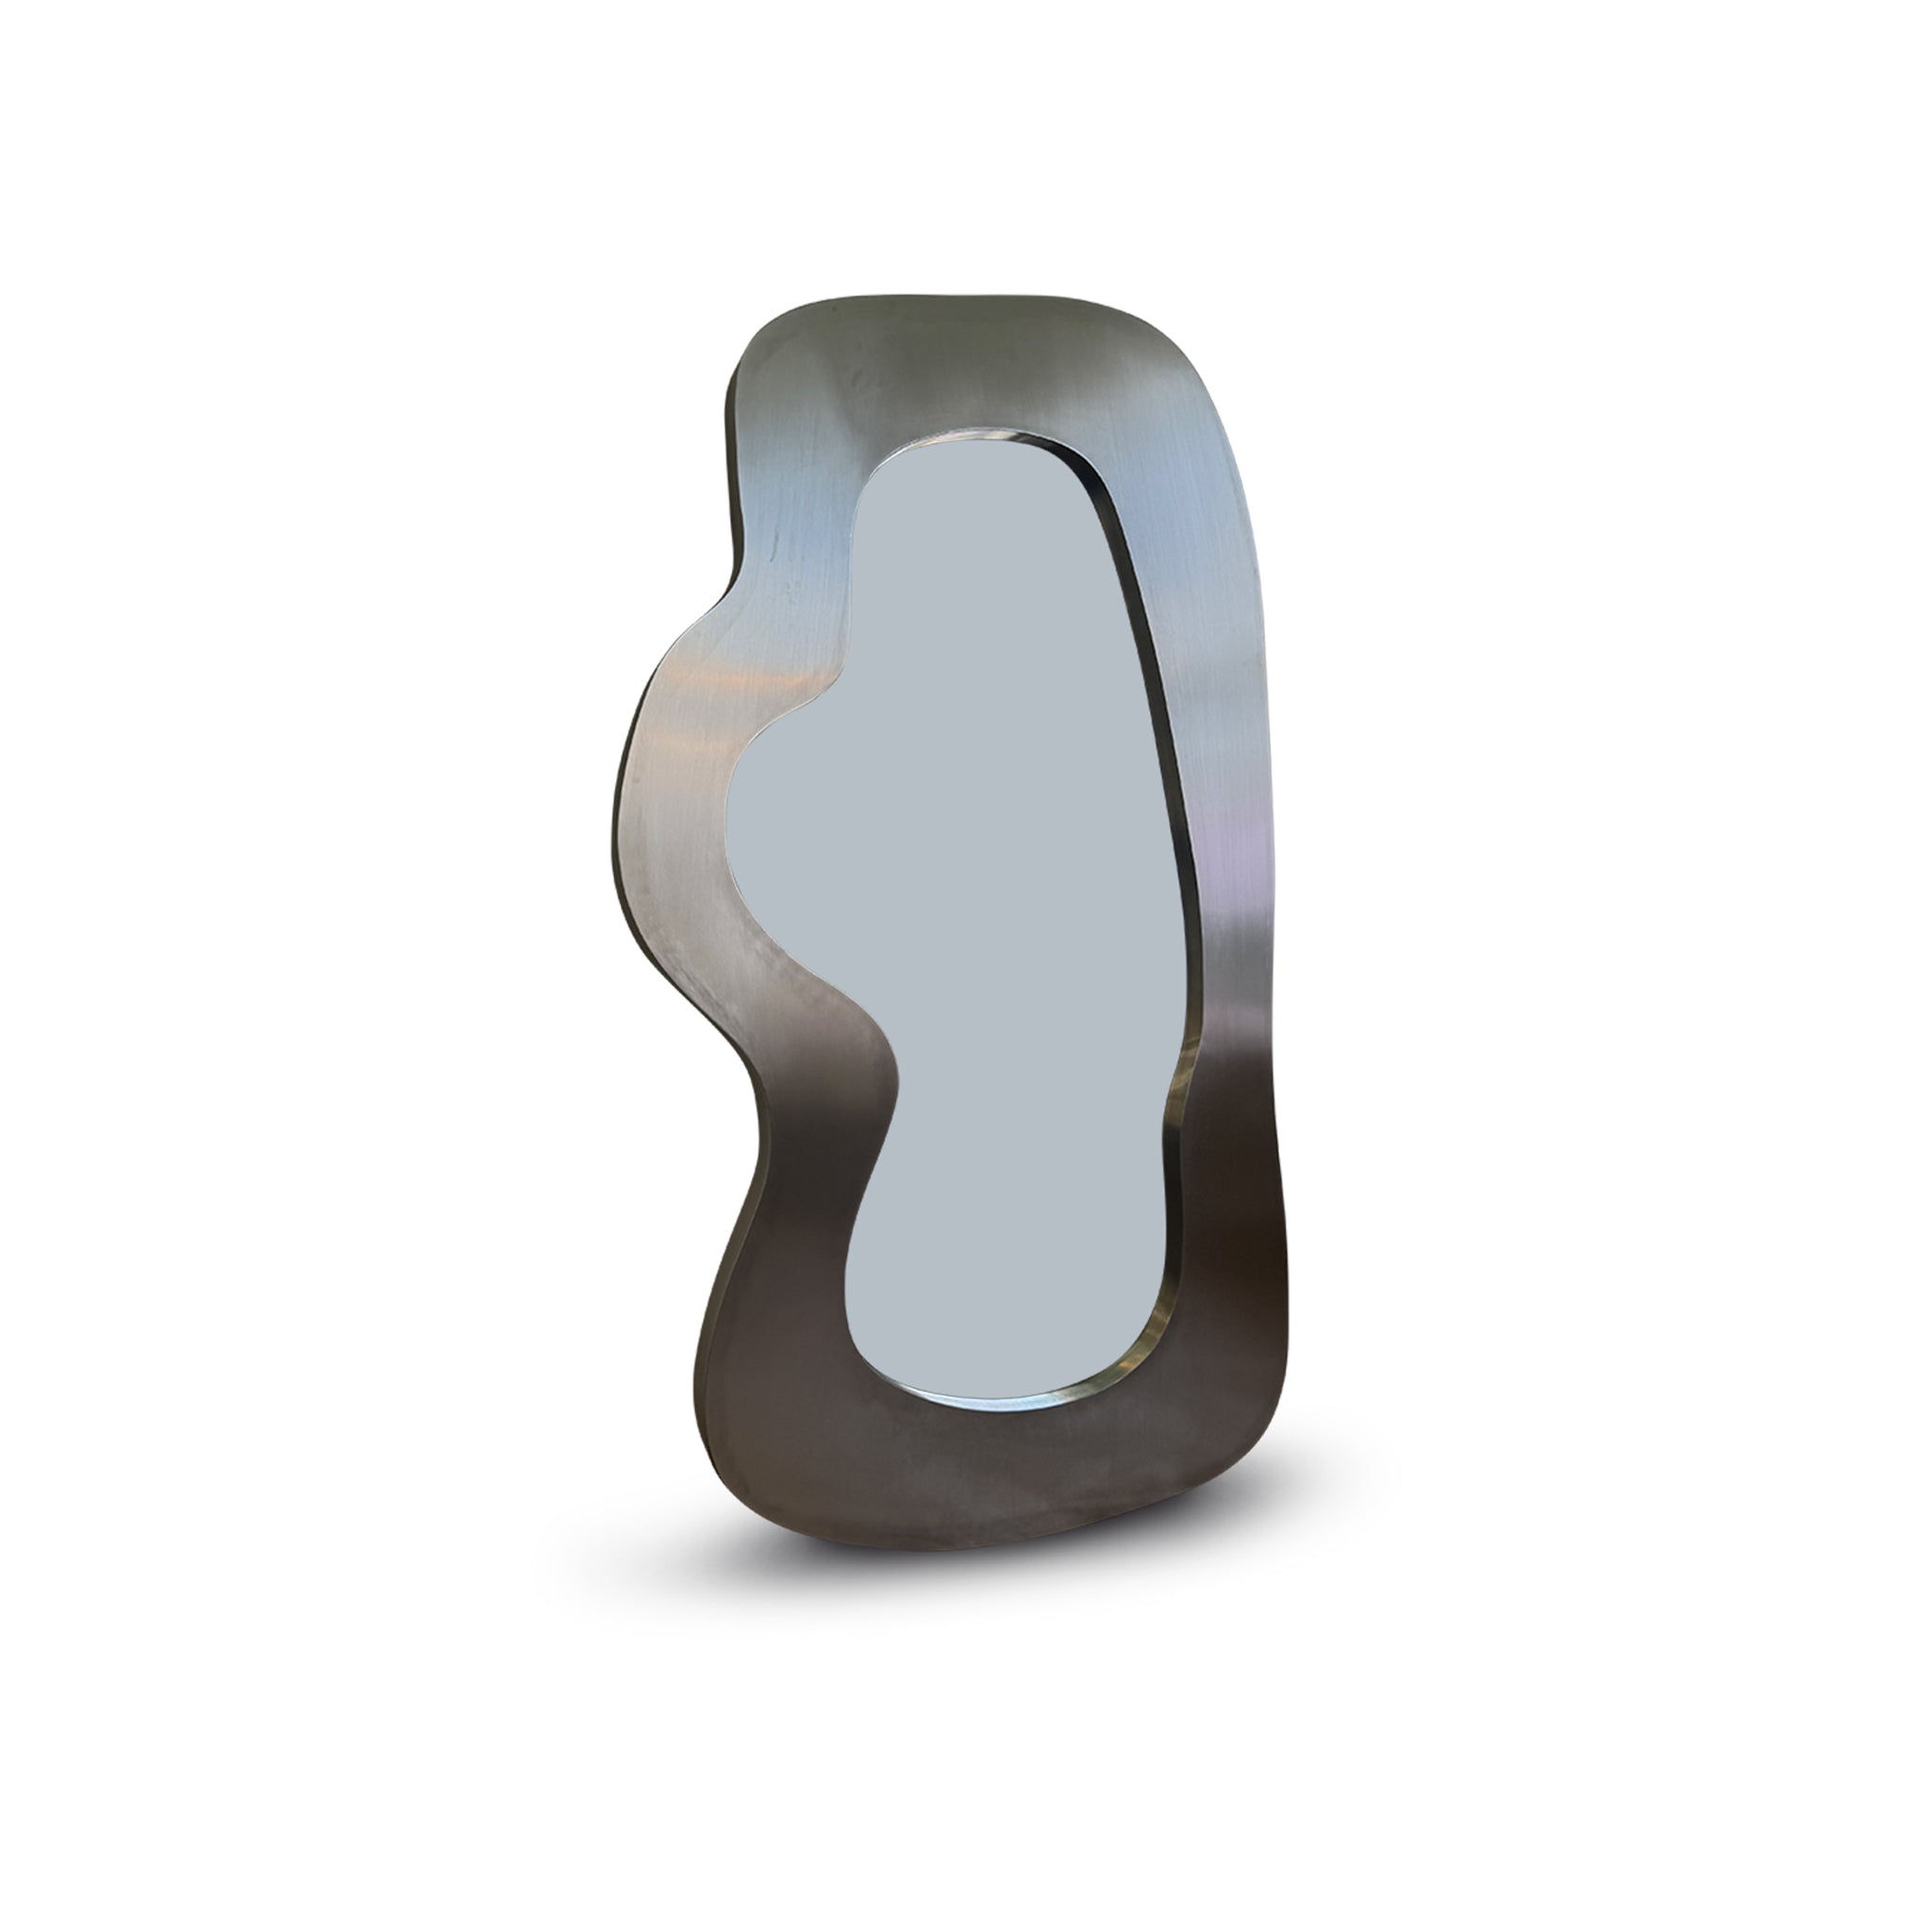 The Millie Mirror in Stainless Steel